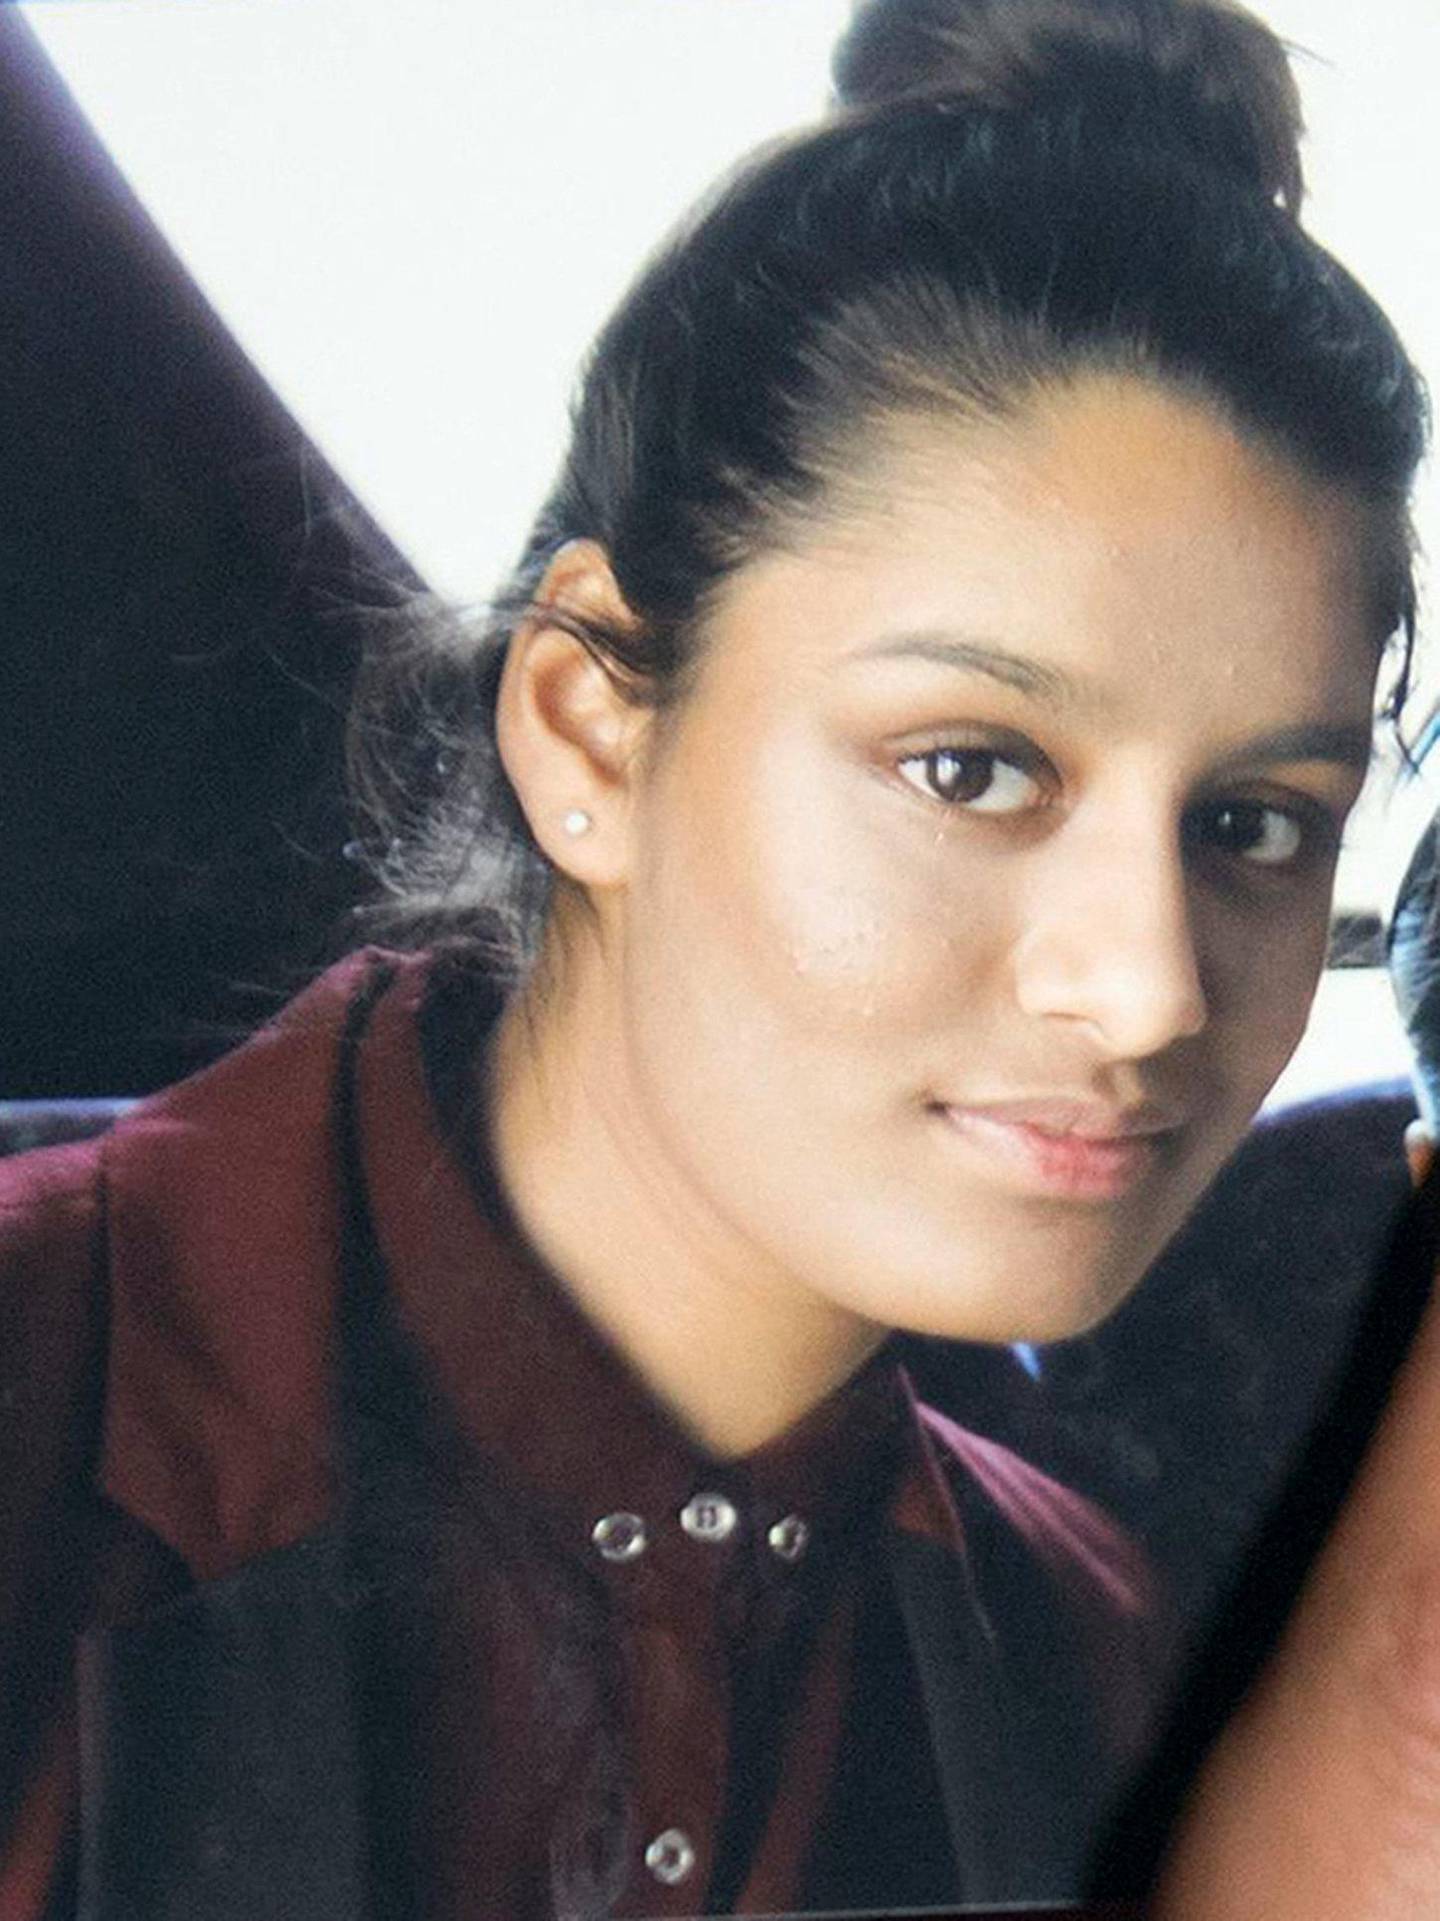 Undated file photo of Islamic State bride Shamima Begum who said she regrets speaking to the media and wishes she had found a different way to contact her family.